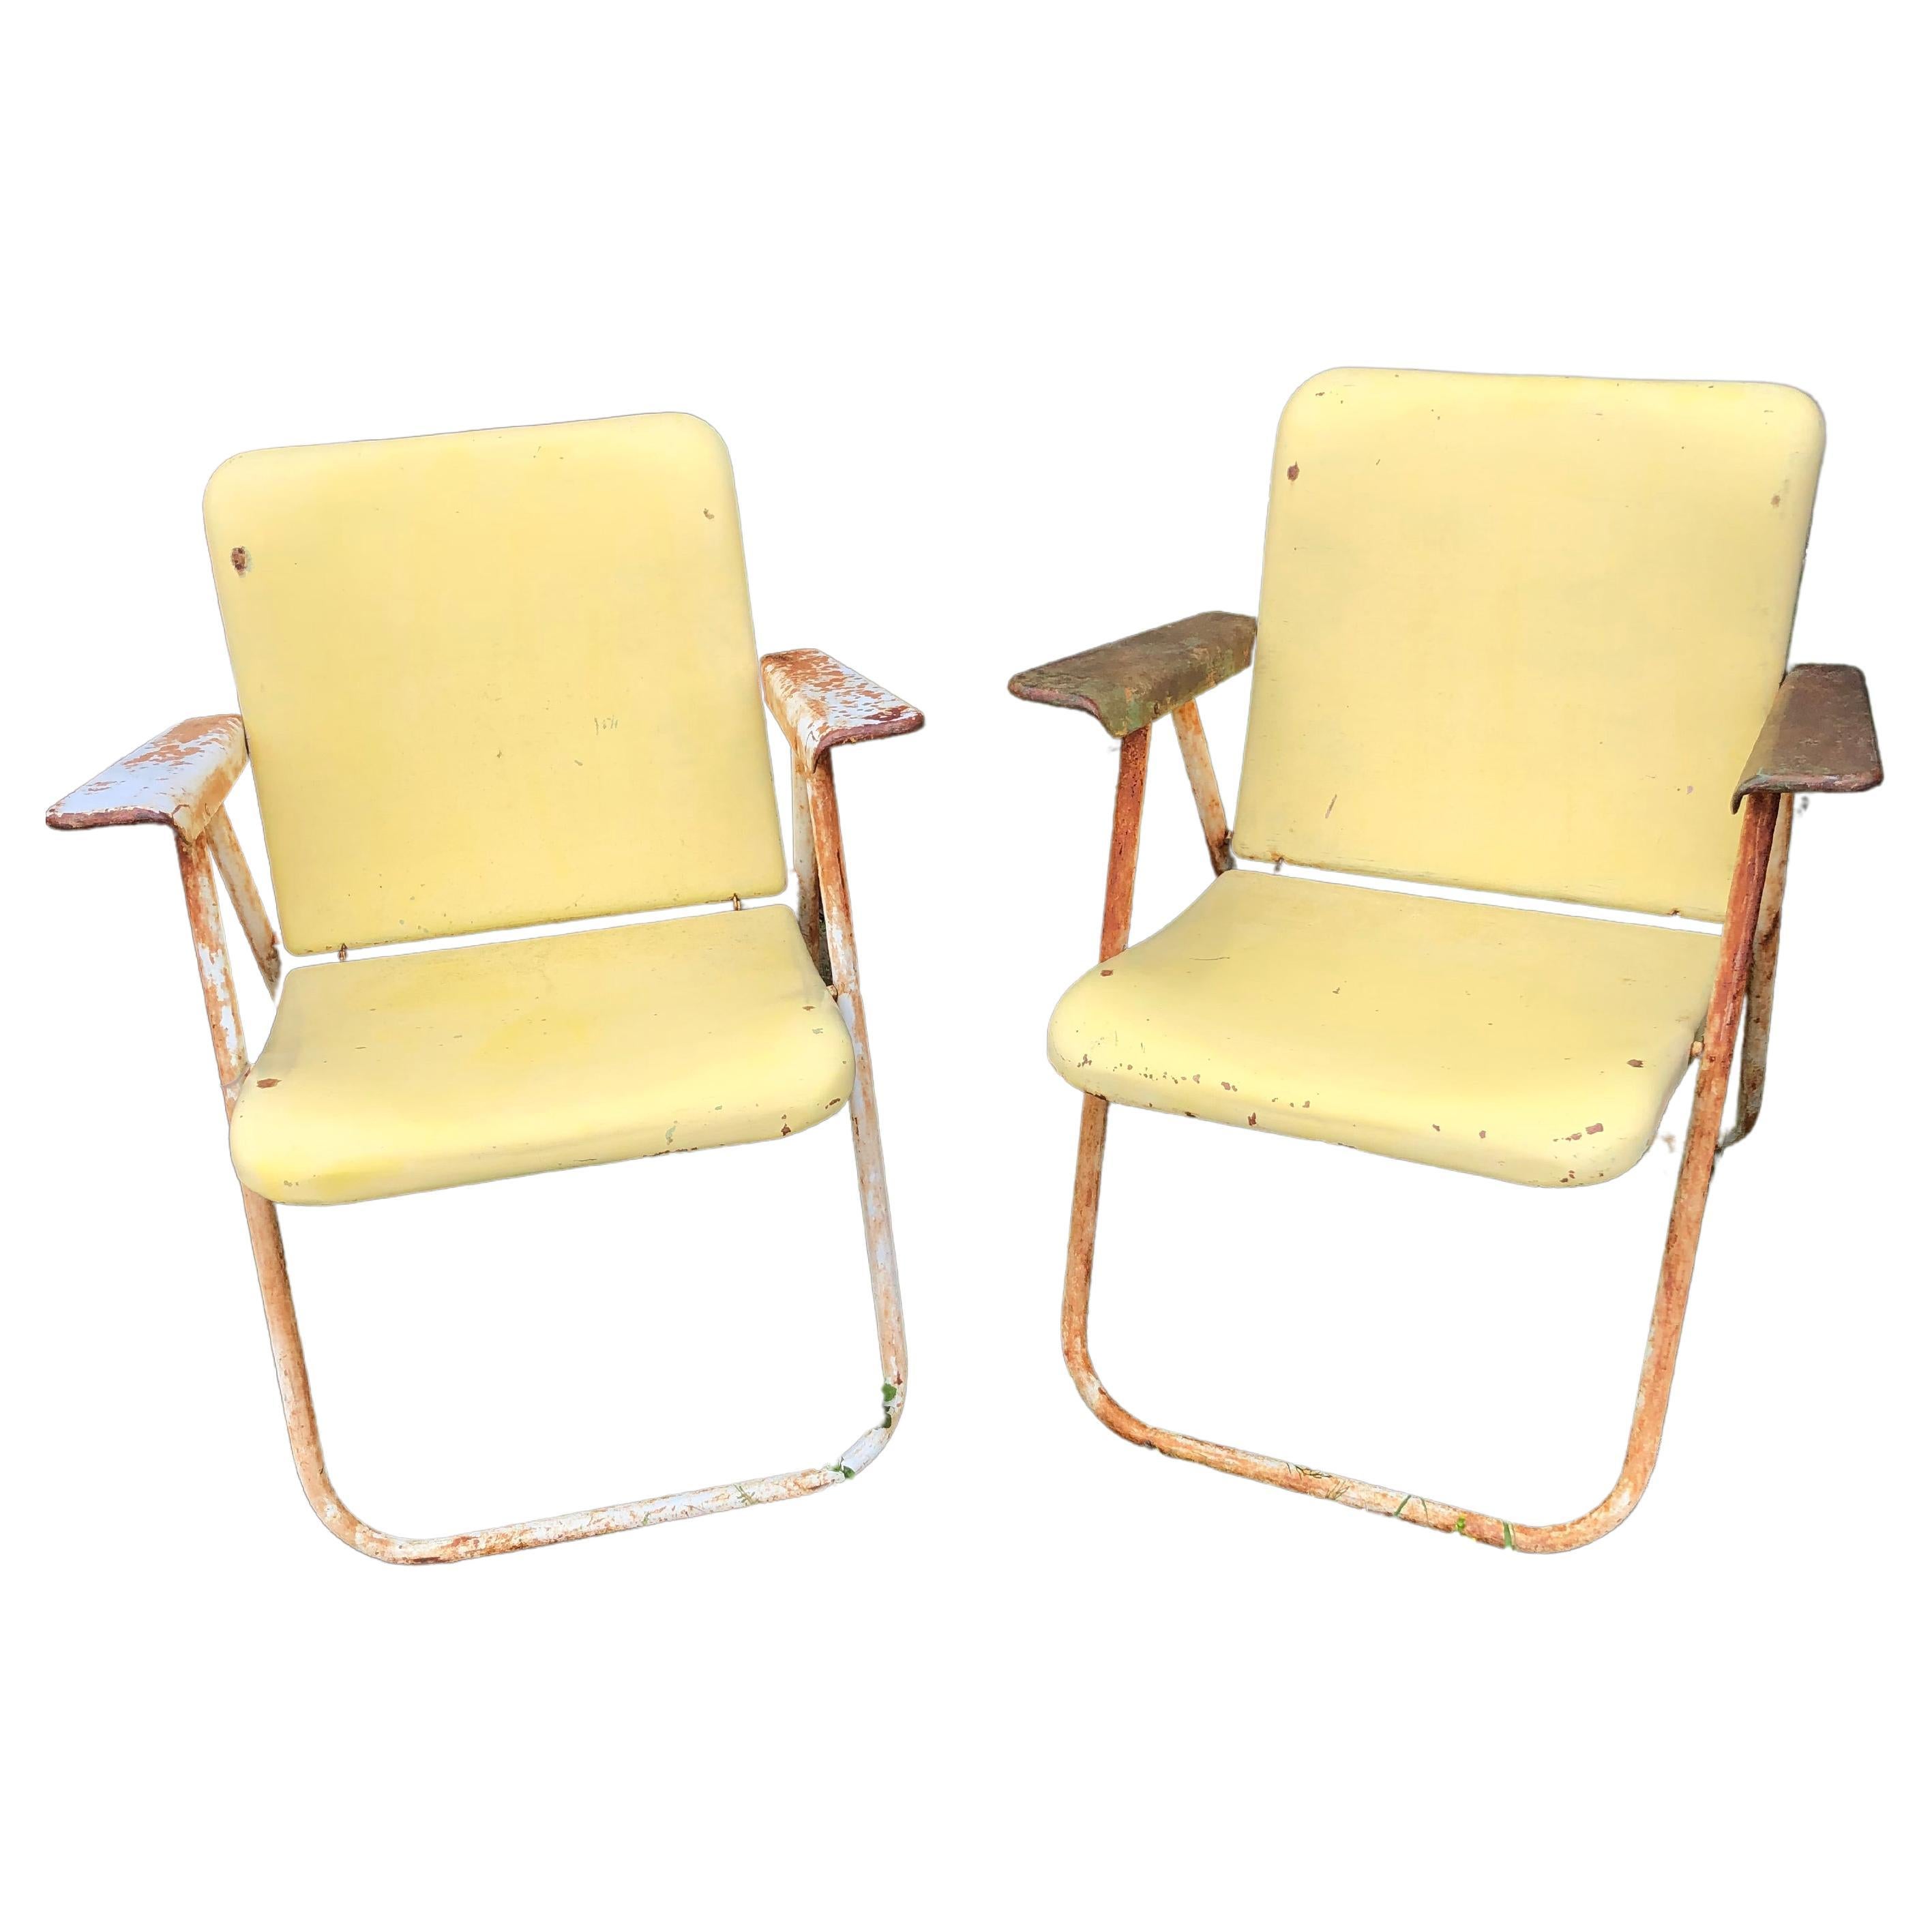 Pair of Super Cool Industrial Vintage Metal Folding Armchairs For Sale